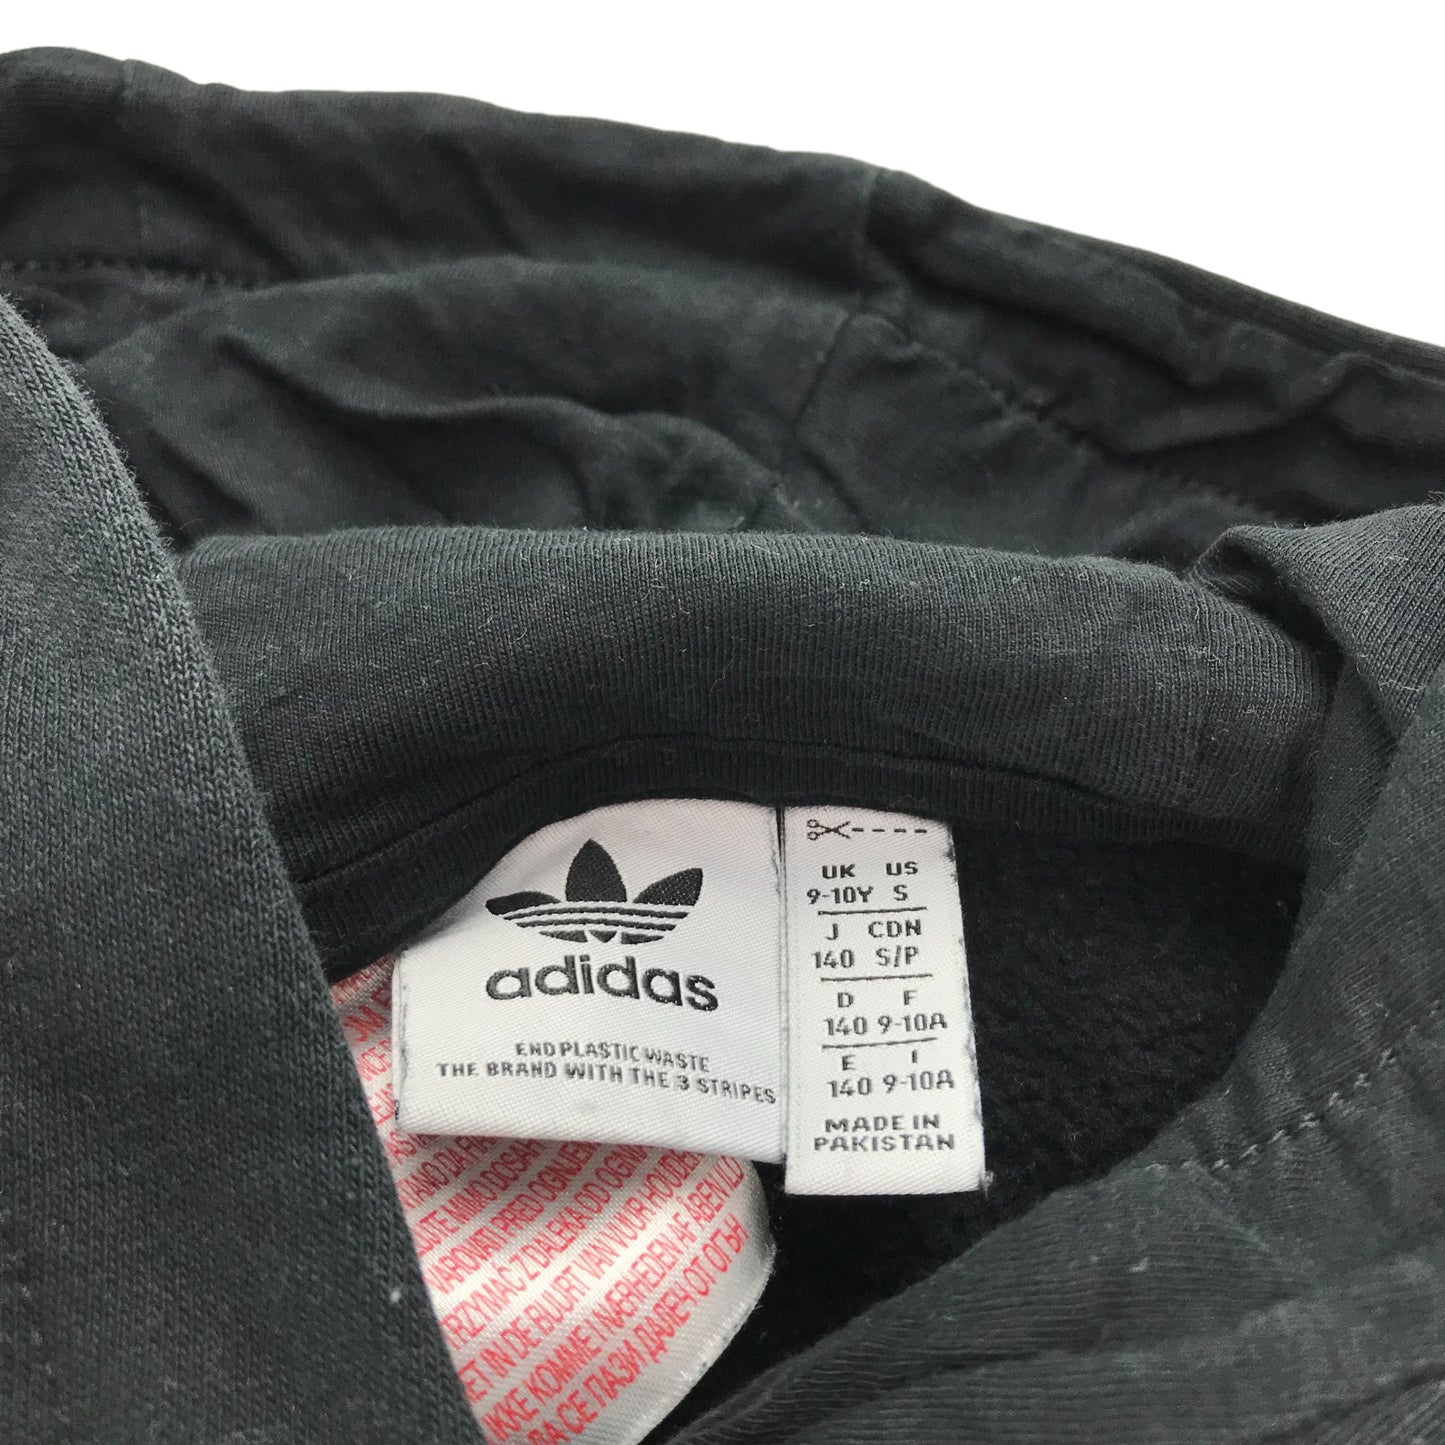 Adidas Hoodie Age 9 Black with Pink Triple Logo and Sleeve Stripes